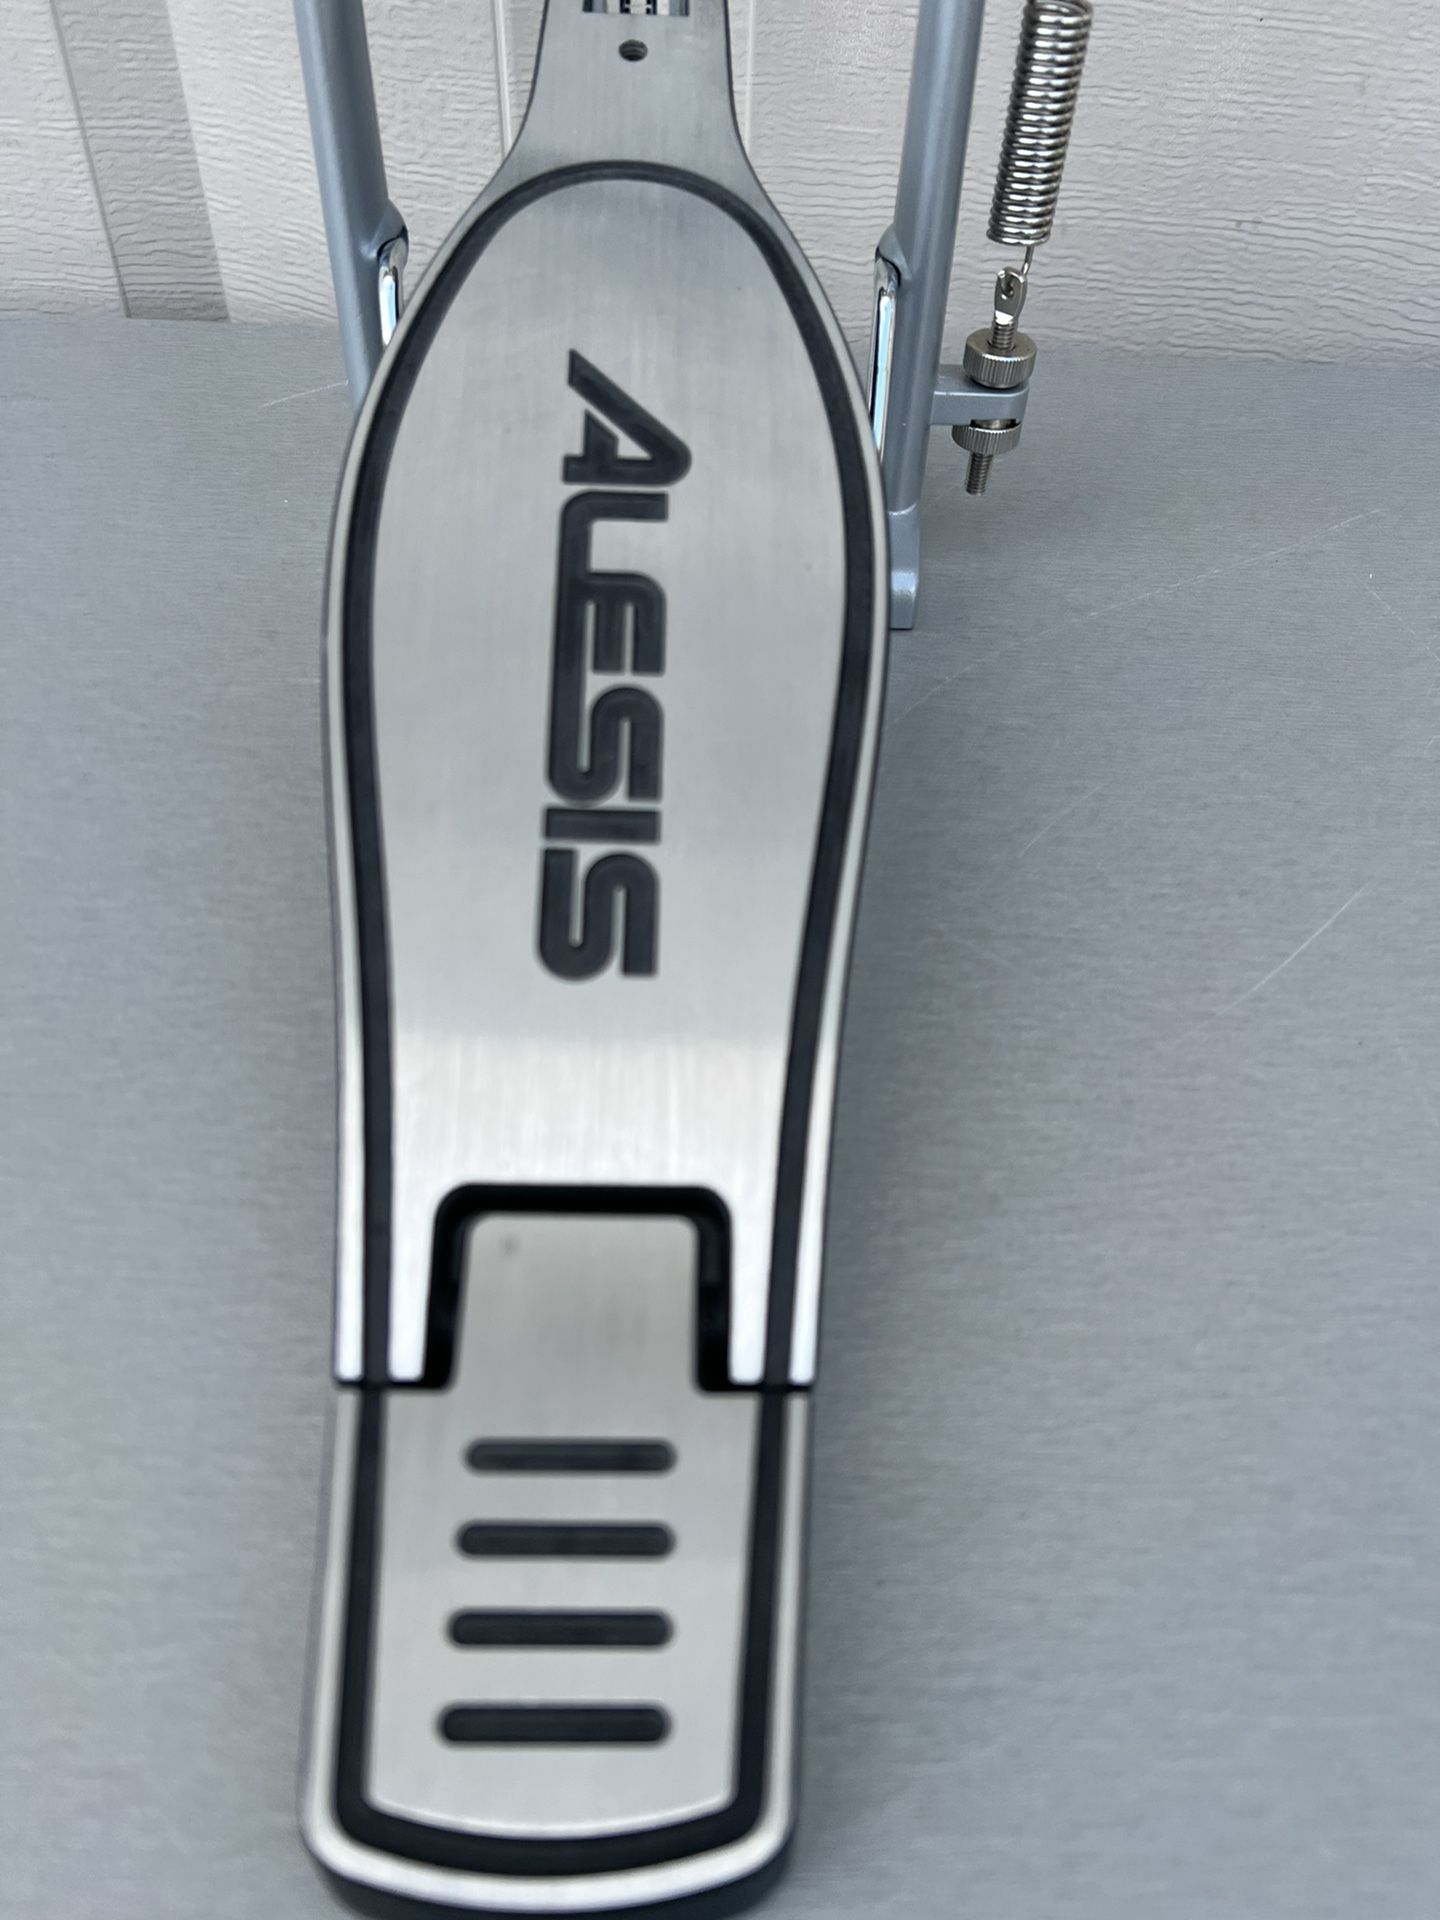 Alesis KP1 Chain Drive Kick Pedal New Open Box Free Shipping!. New without retail packaging and may have very minimal cosmetic blemishes from handling